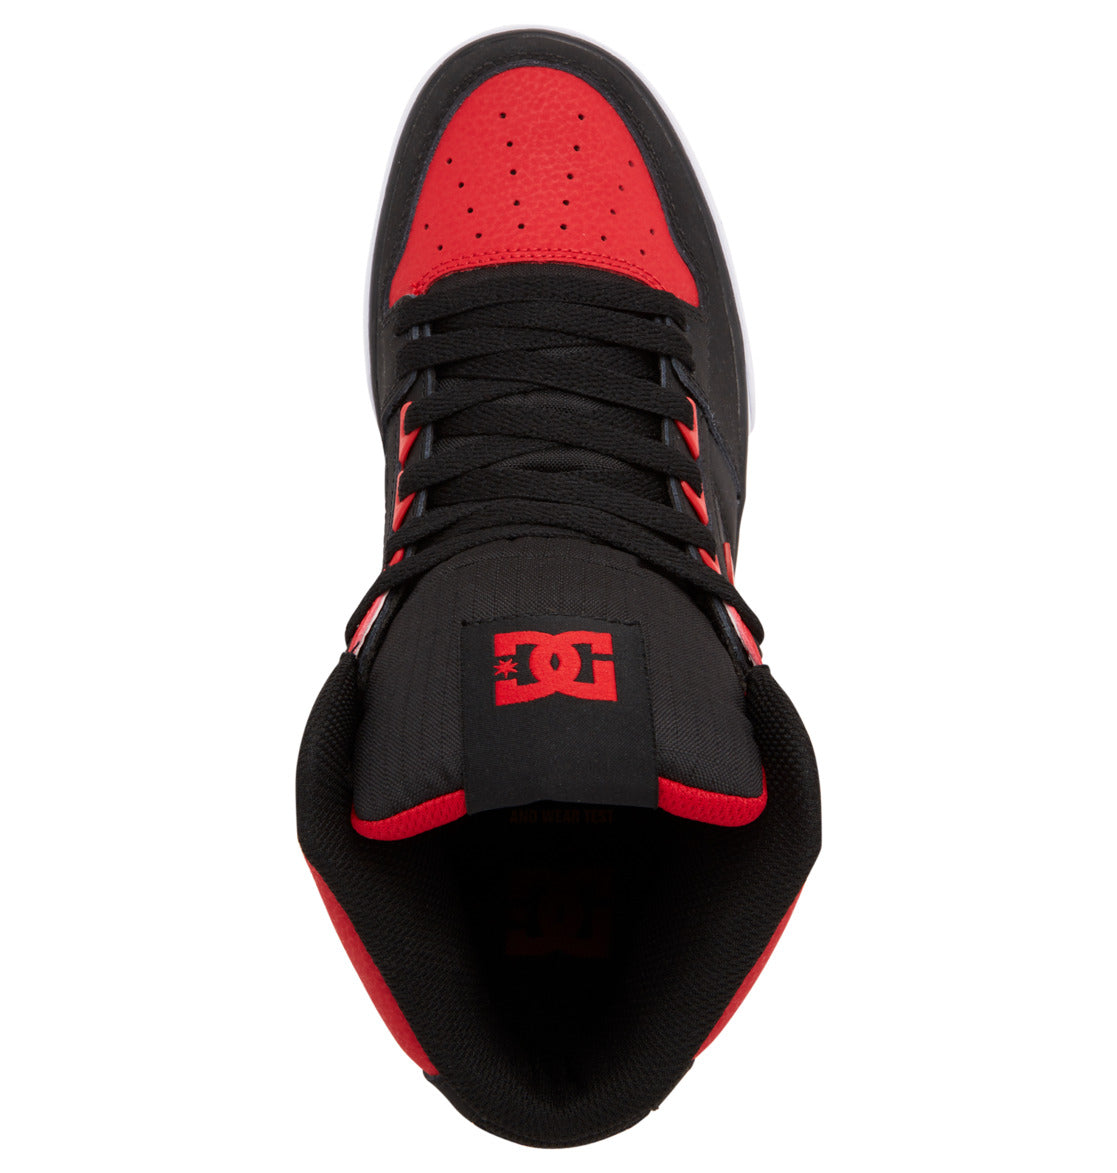 DC MEN'S PURE HIGH-TOP SHOES - (ADYS400043) - RED - R2L11